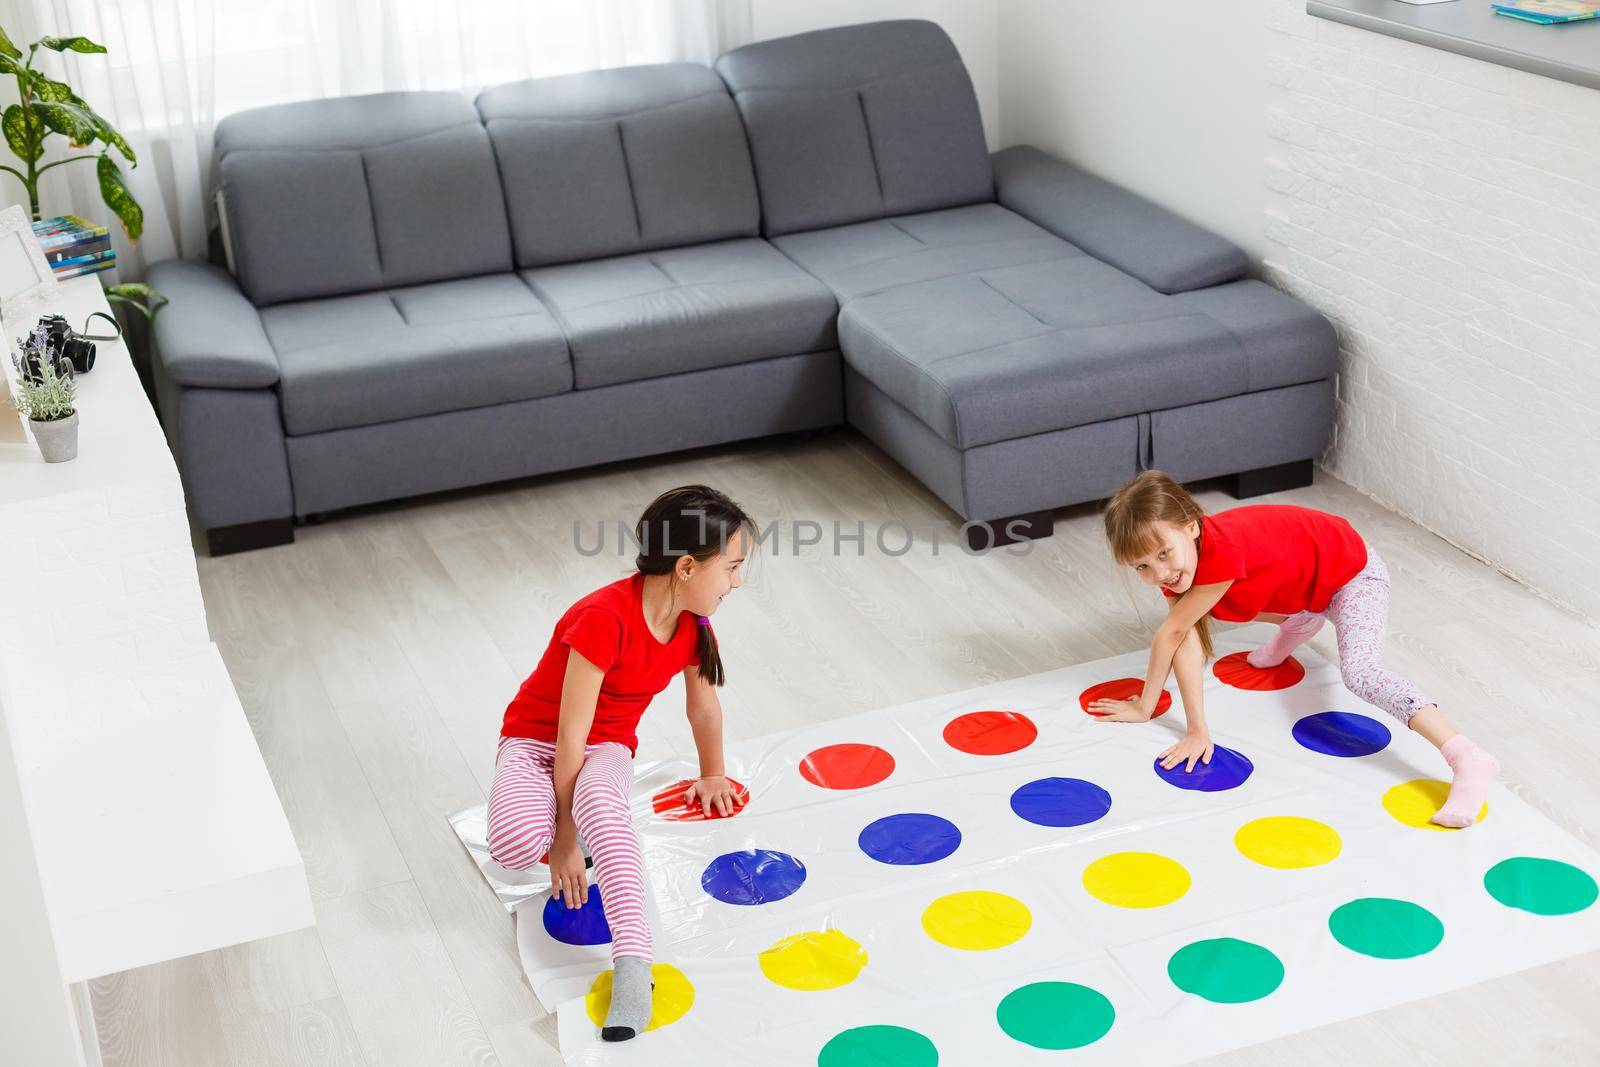 two little girls Having Fun Playing Game On Floor At Home. Siblings Friendship